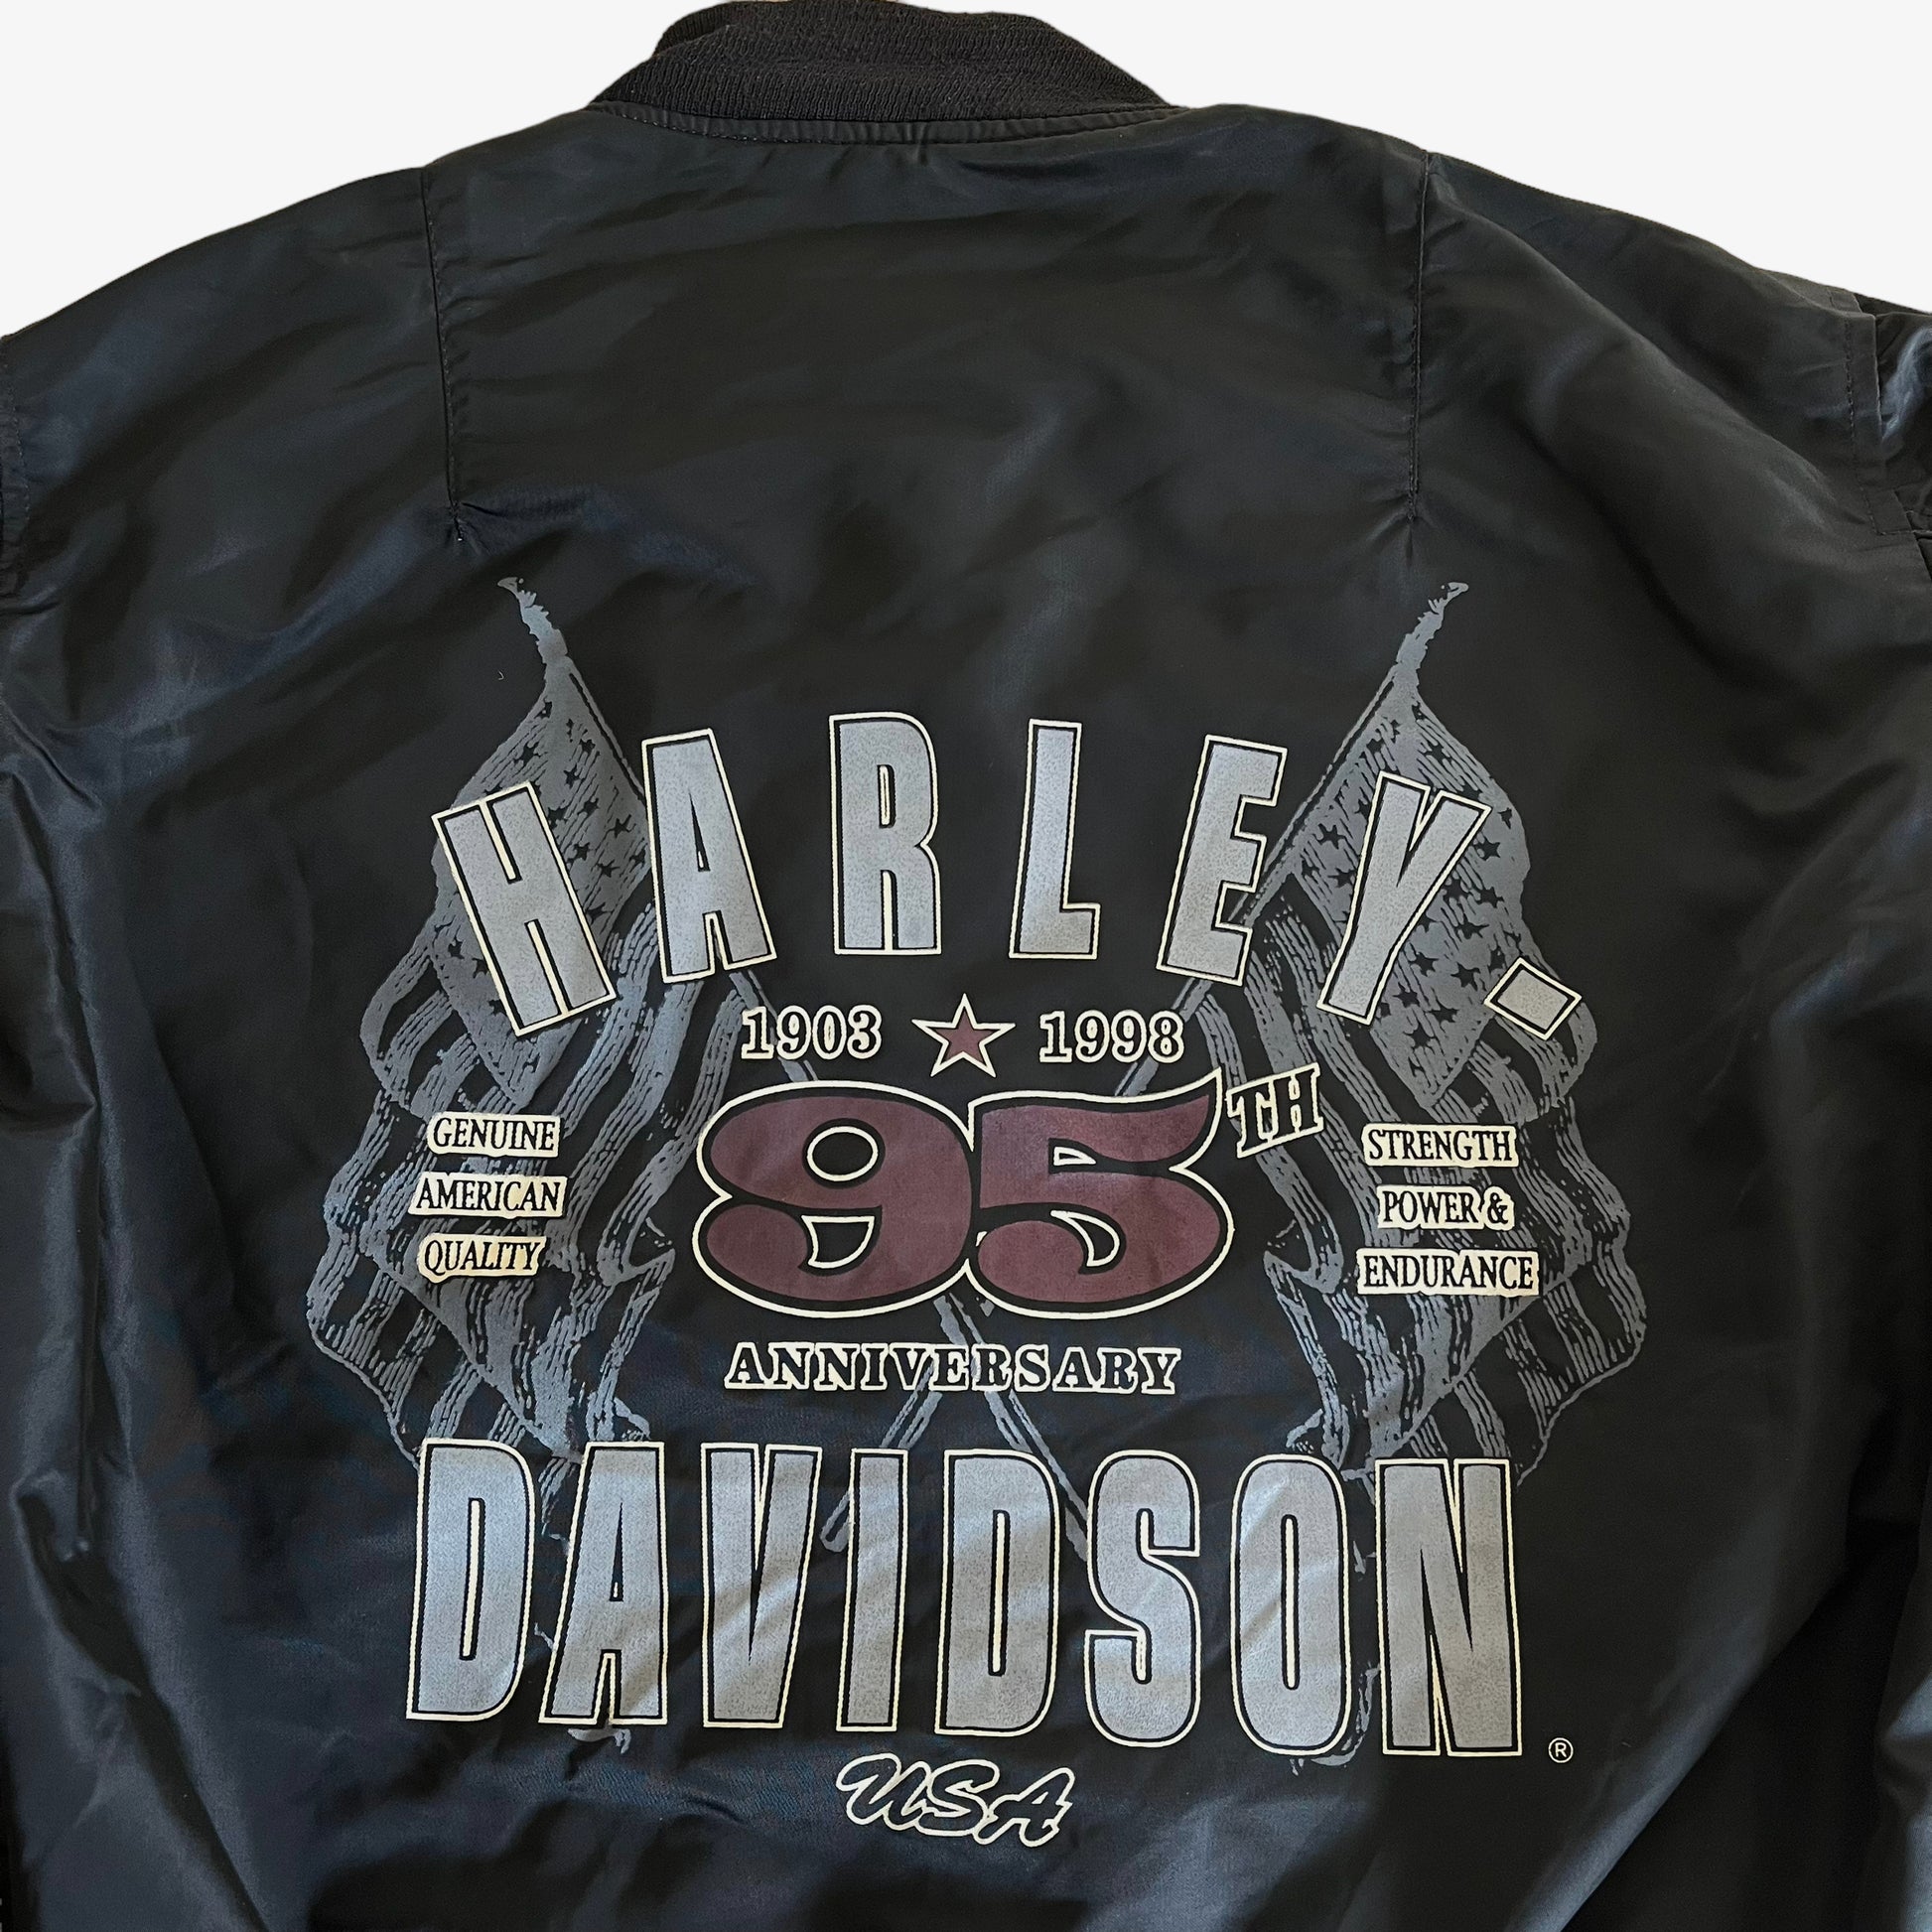 Vintage 1998 Harley Davidson 95th Anniversary Bomber Jacket With Back Spell Out Back Logo - Casspios Dream